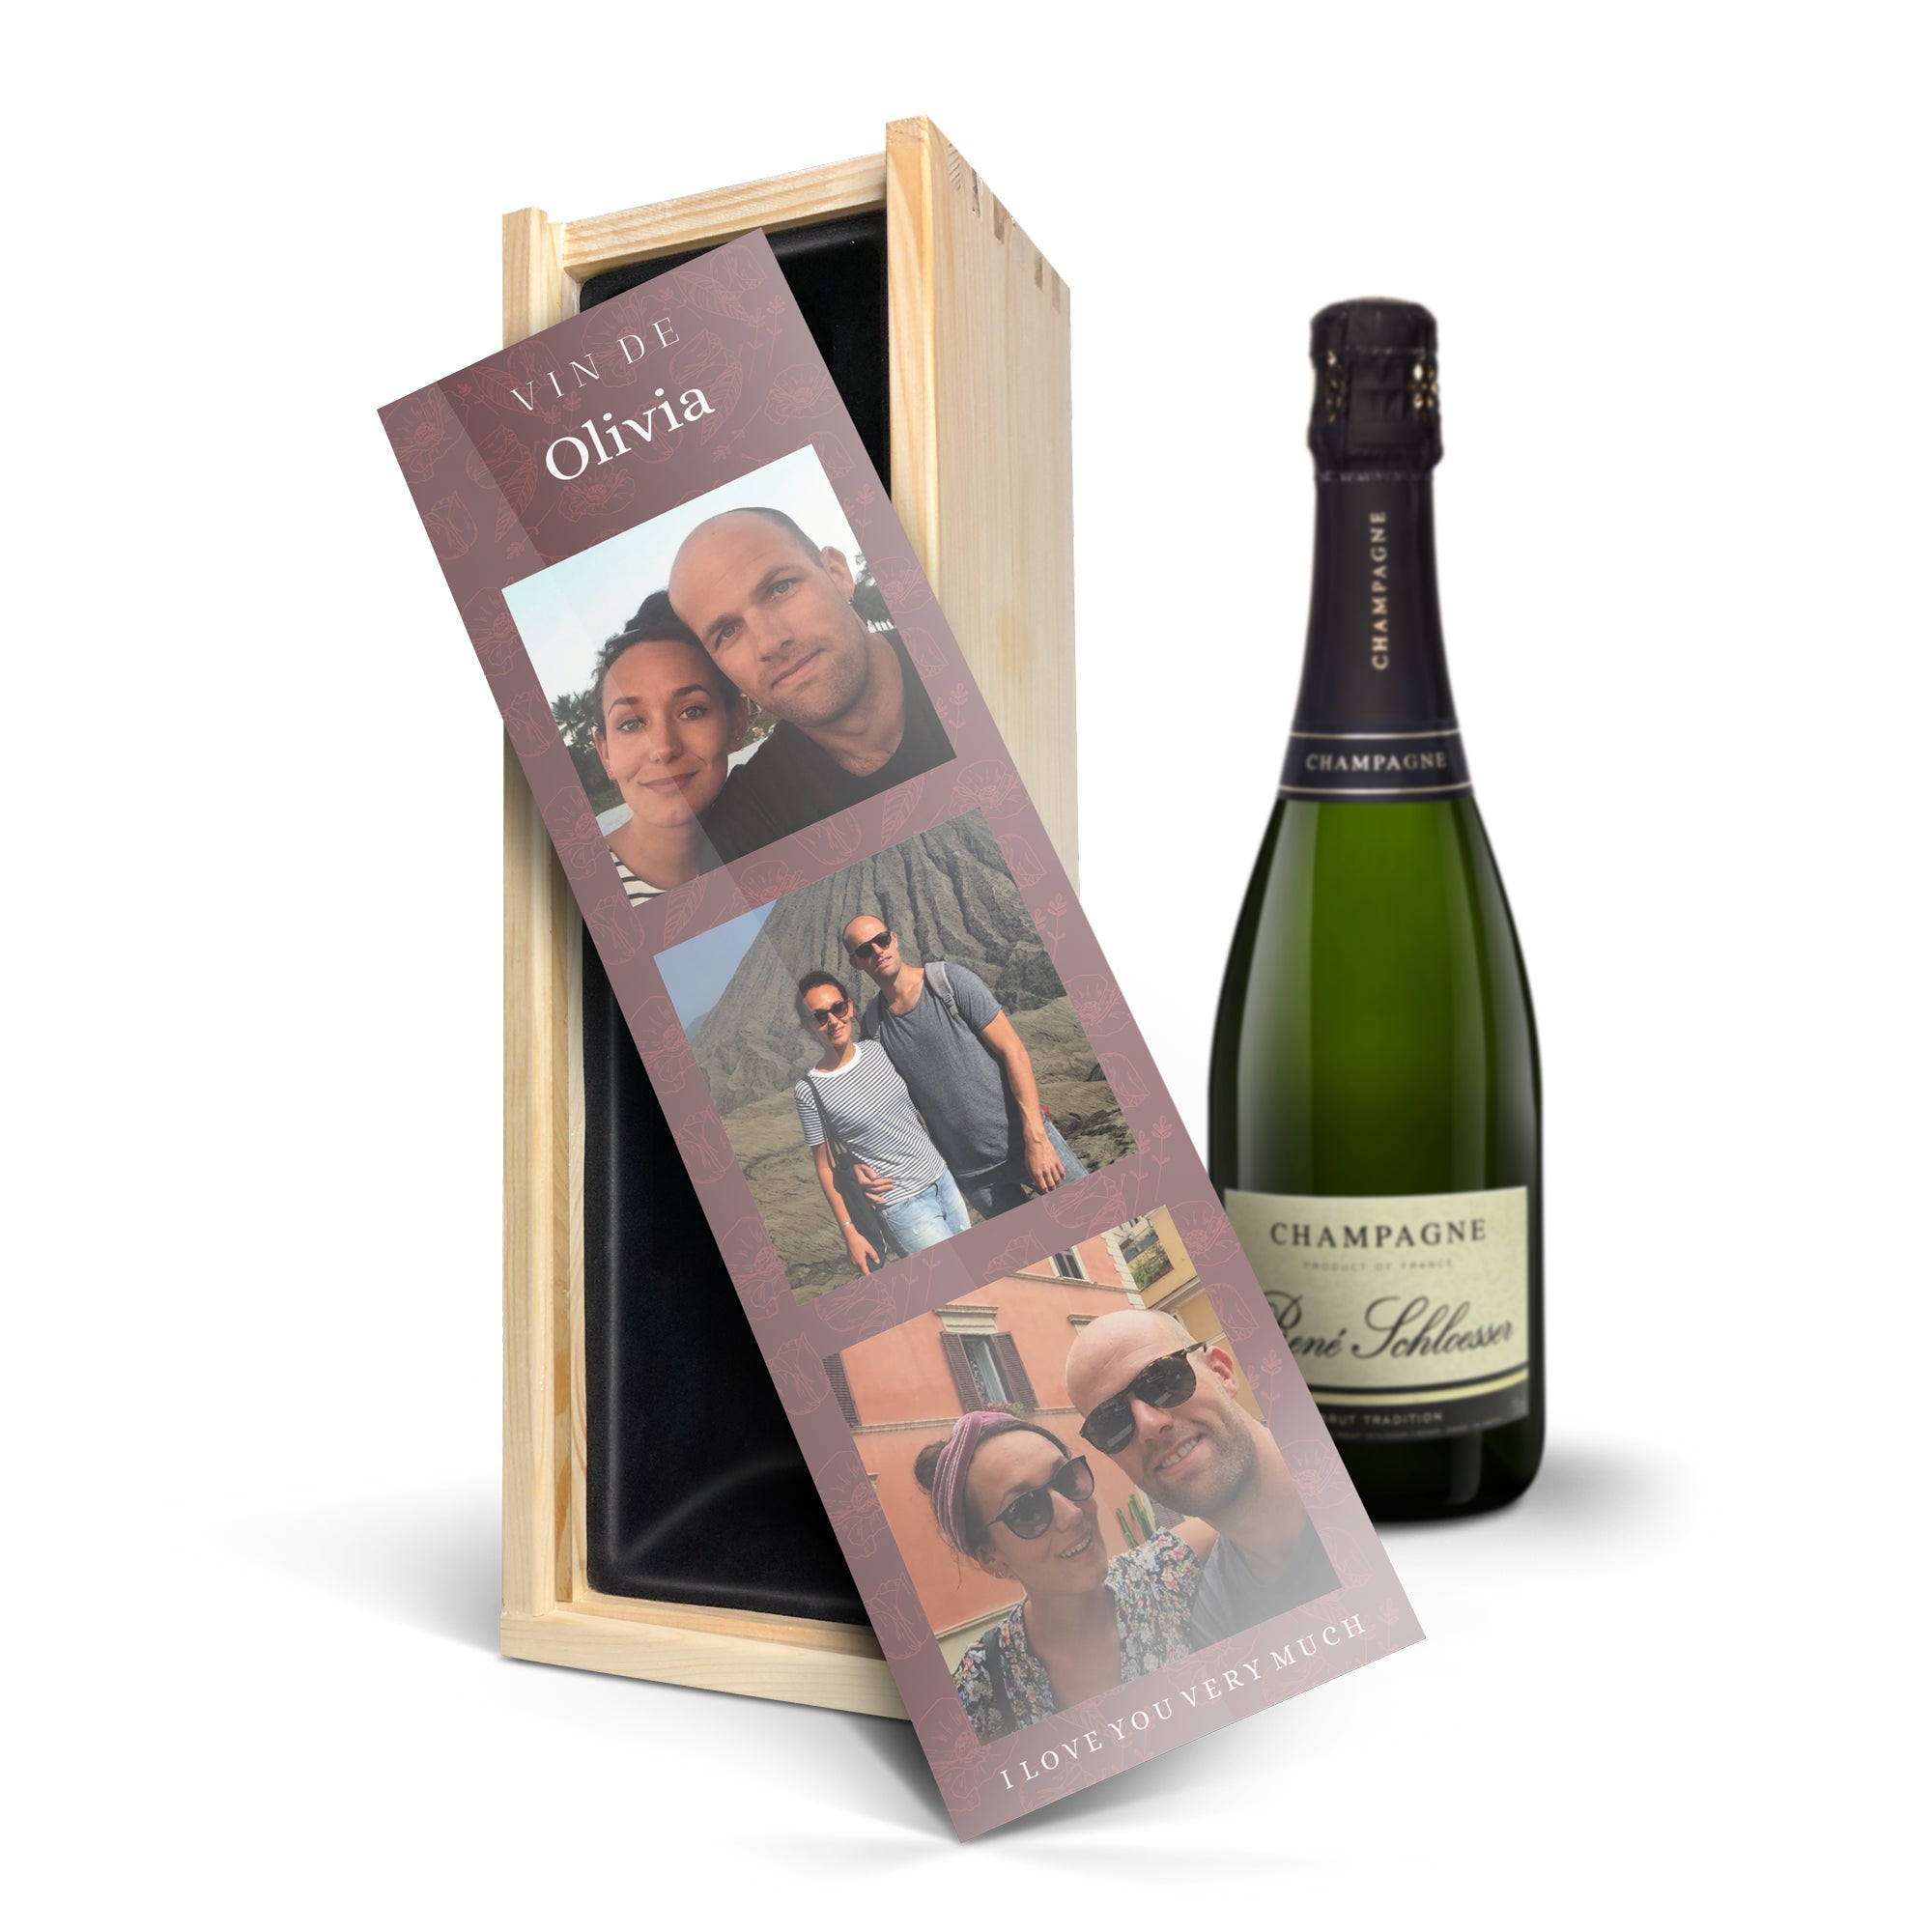 Champagne in personalised case - Rene Schloesser (750ml)